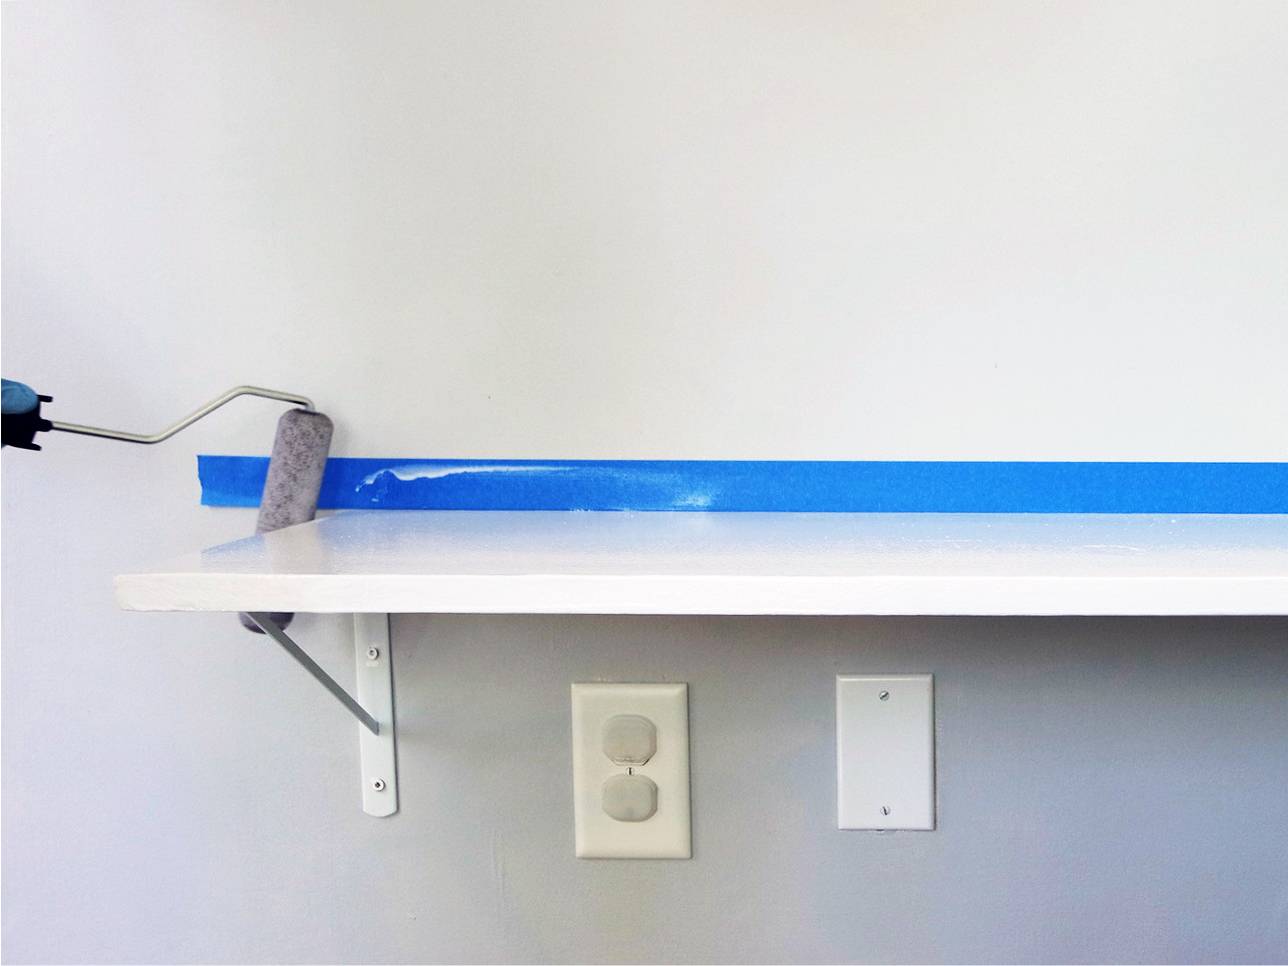 Painting a dry-eraser-friendly desk.